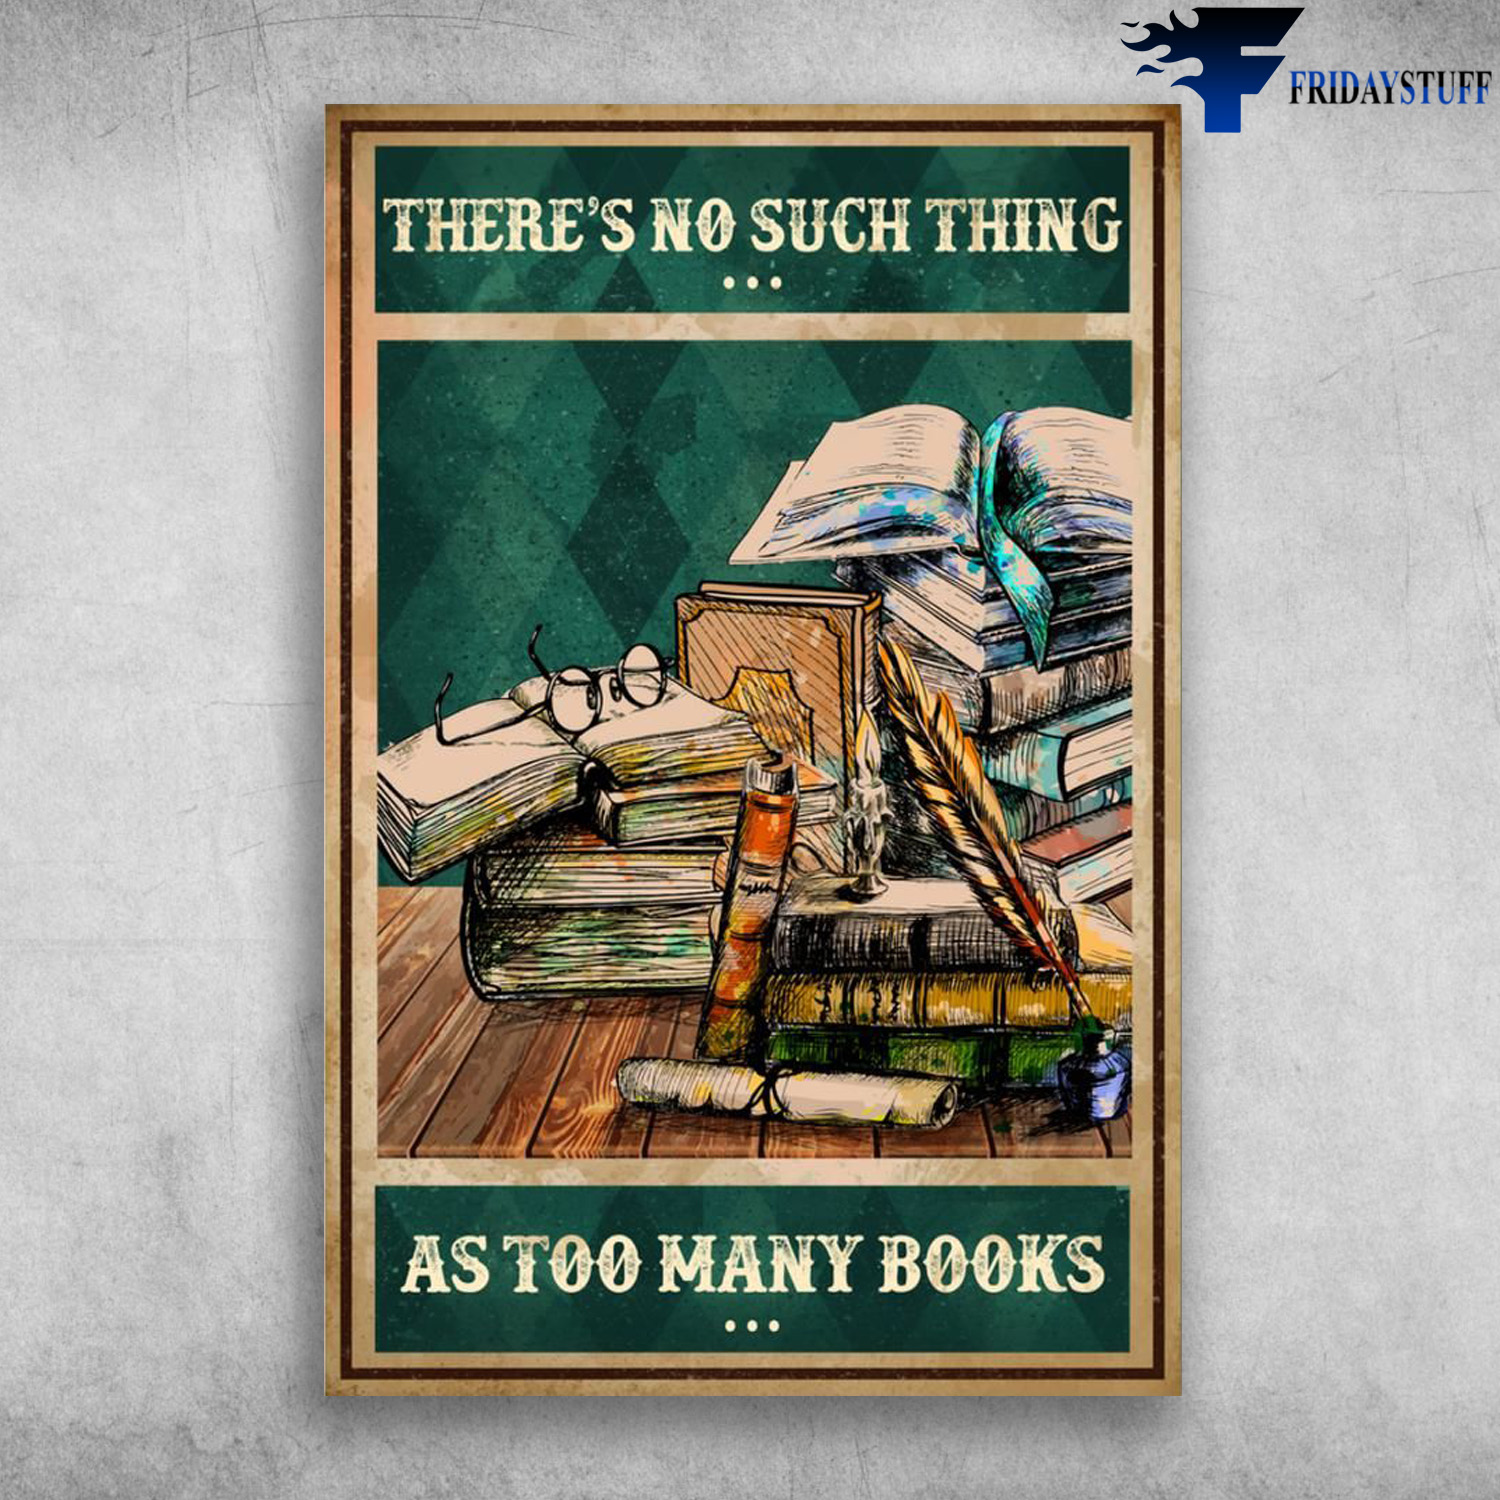 The Books - There's No Such Thing, As Too Many Books